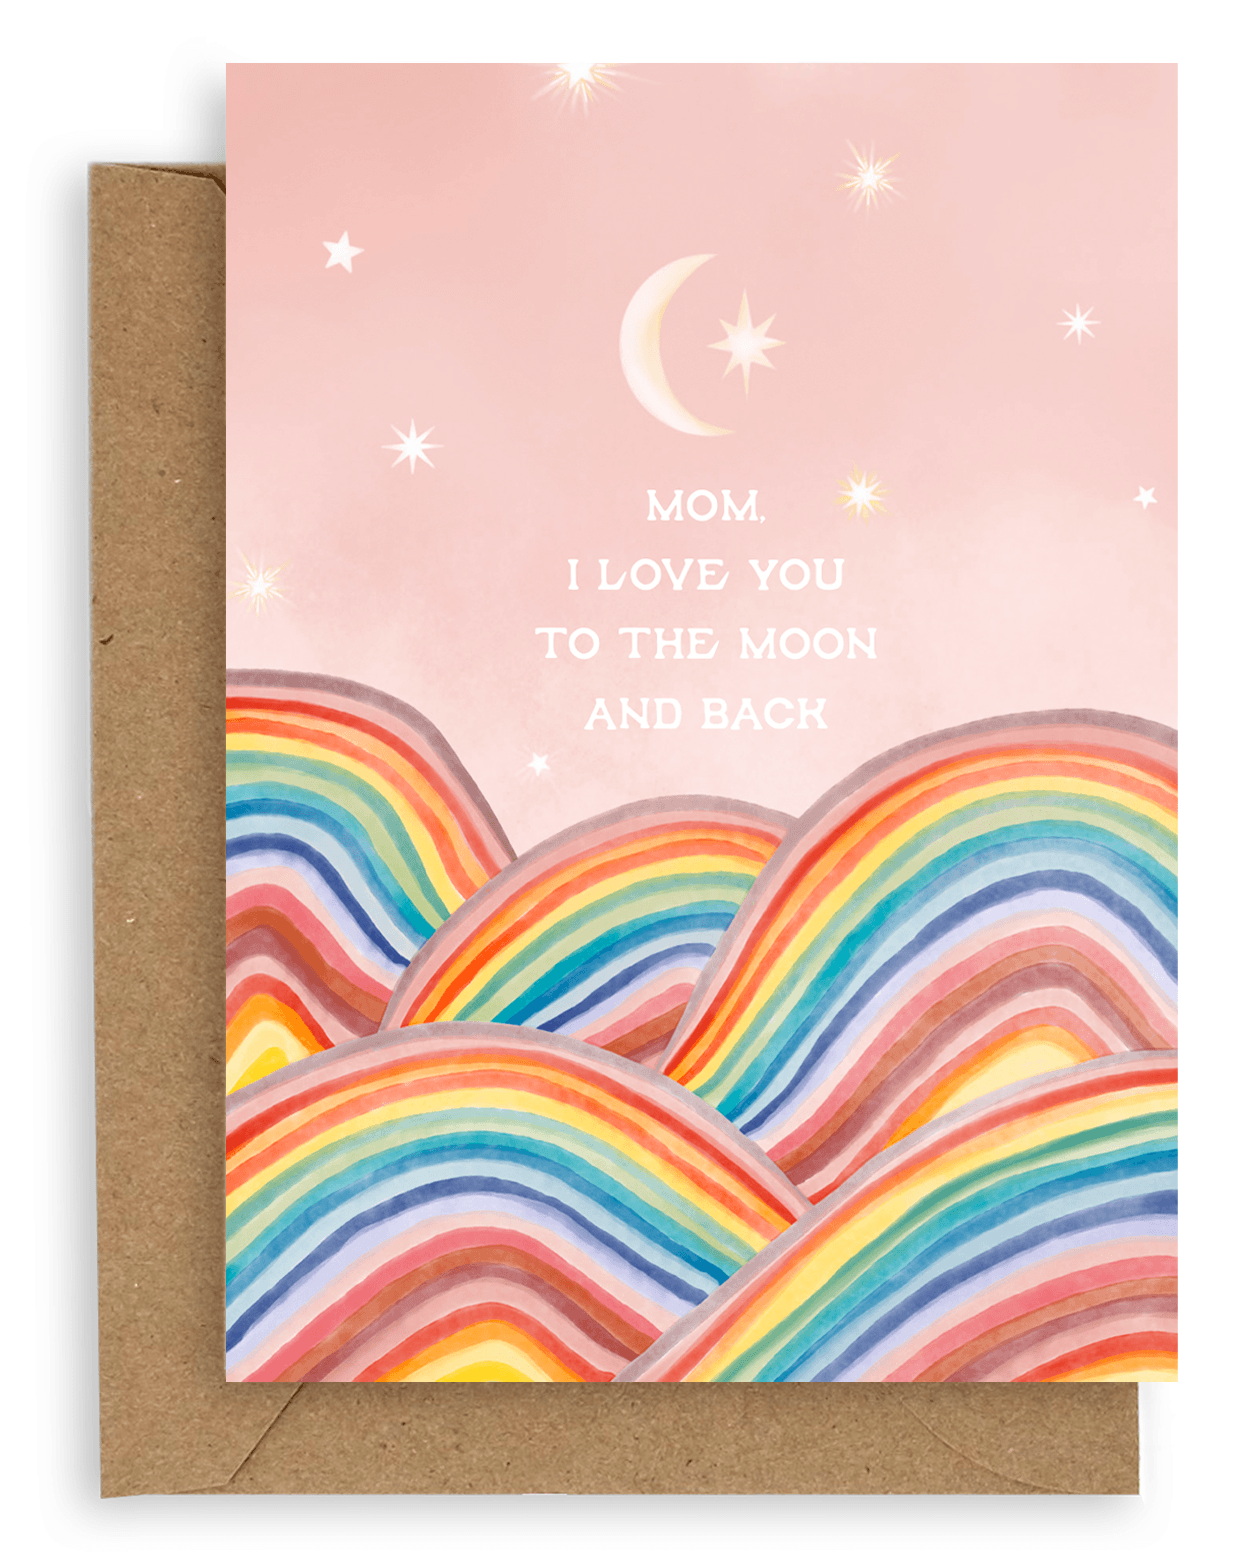 Adelfi card with the words &quot;Mom, I love you to the moon and back&quot; floating in a pink sky with a crescent moon and stars above rainbow hills. Card is shown on a kraft envelope.